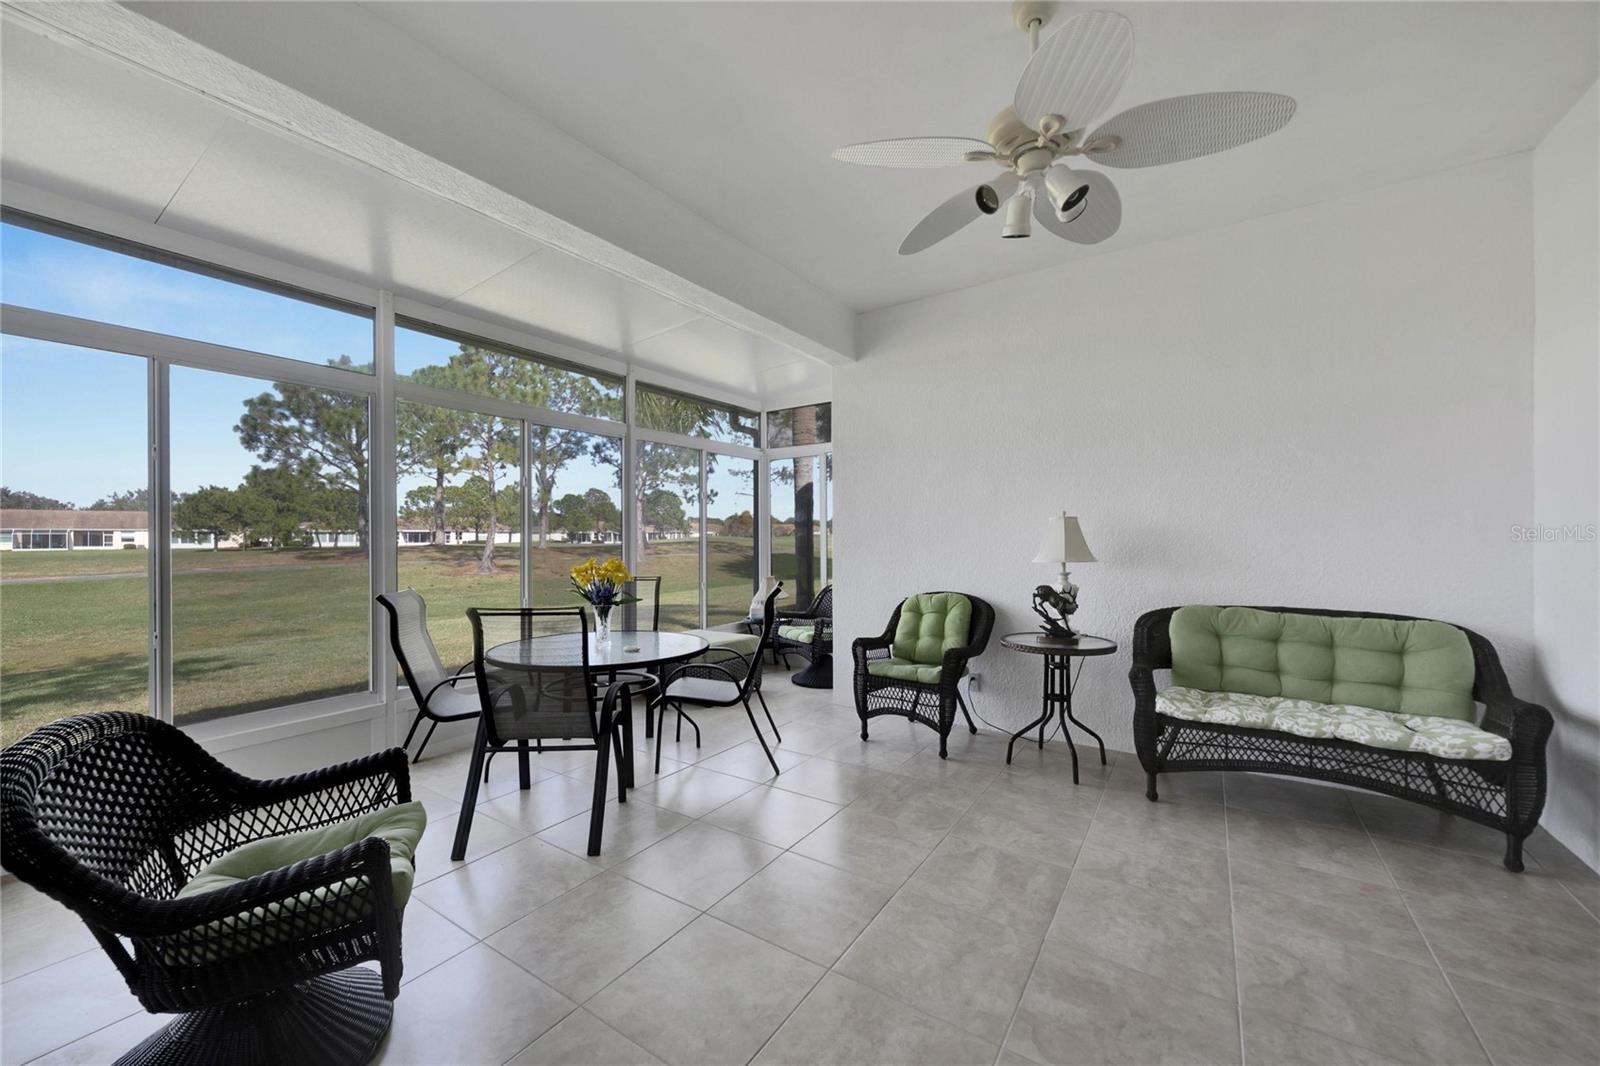 Nicely furnished with tile flooring you'll never get tired of the magnificent view from the family room!